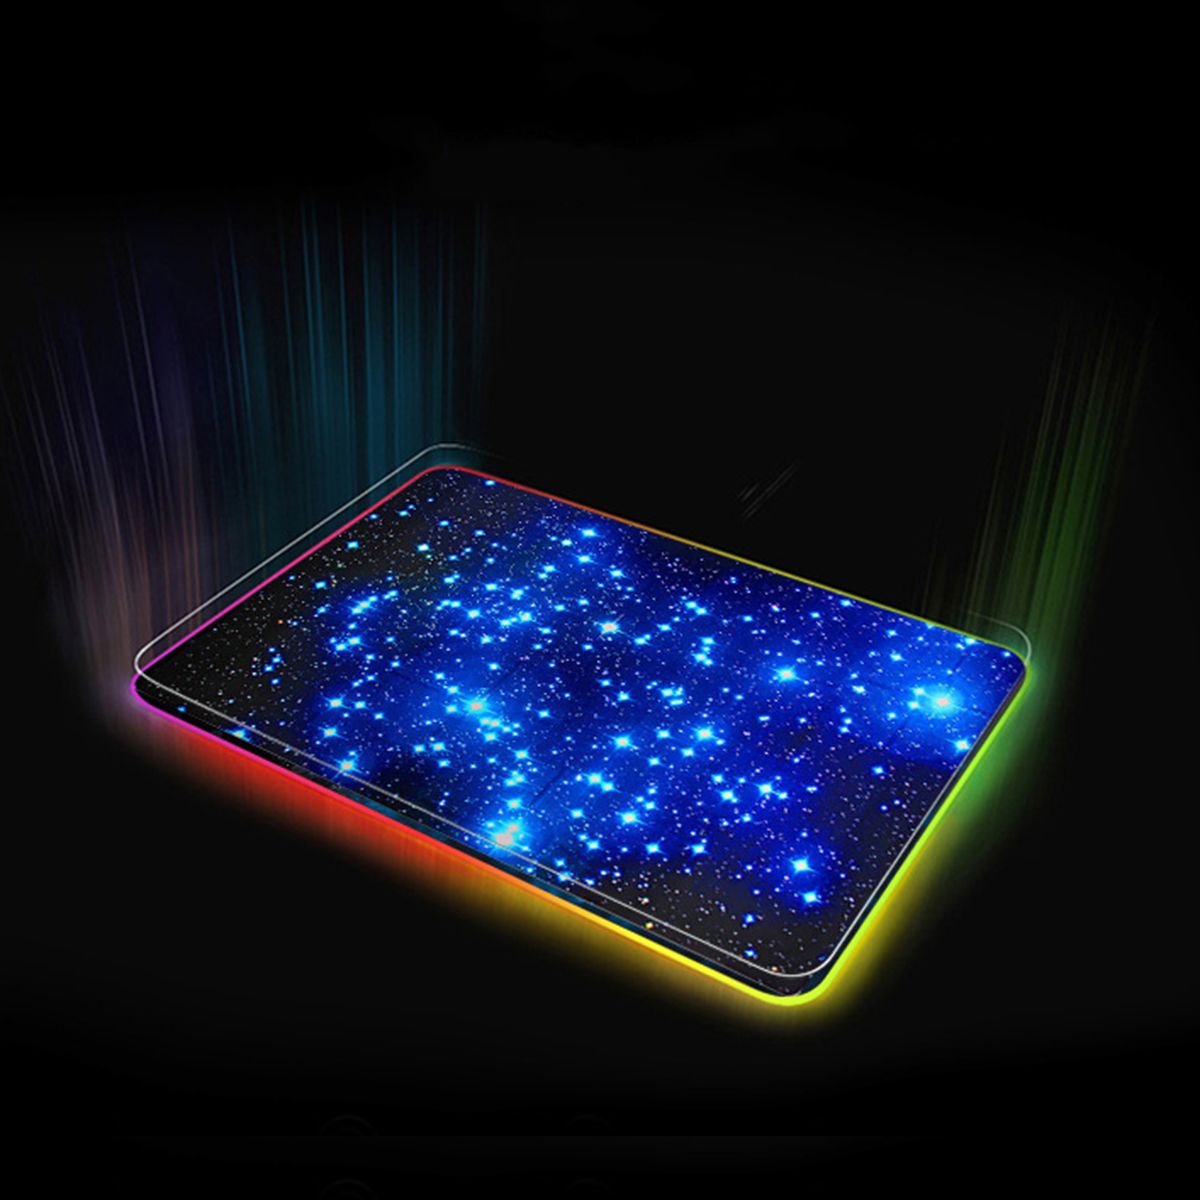 Galaxy-RGB-Mouse-Pad-Gaming-Keyboard-Pad-Non-slip-Rubber-Desktop-Table-Protective-Mat-for-Home-Offic-1757265